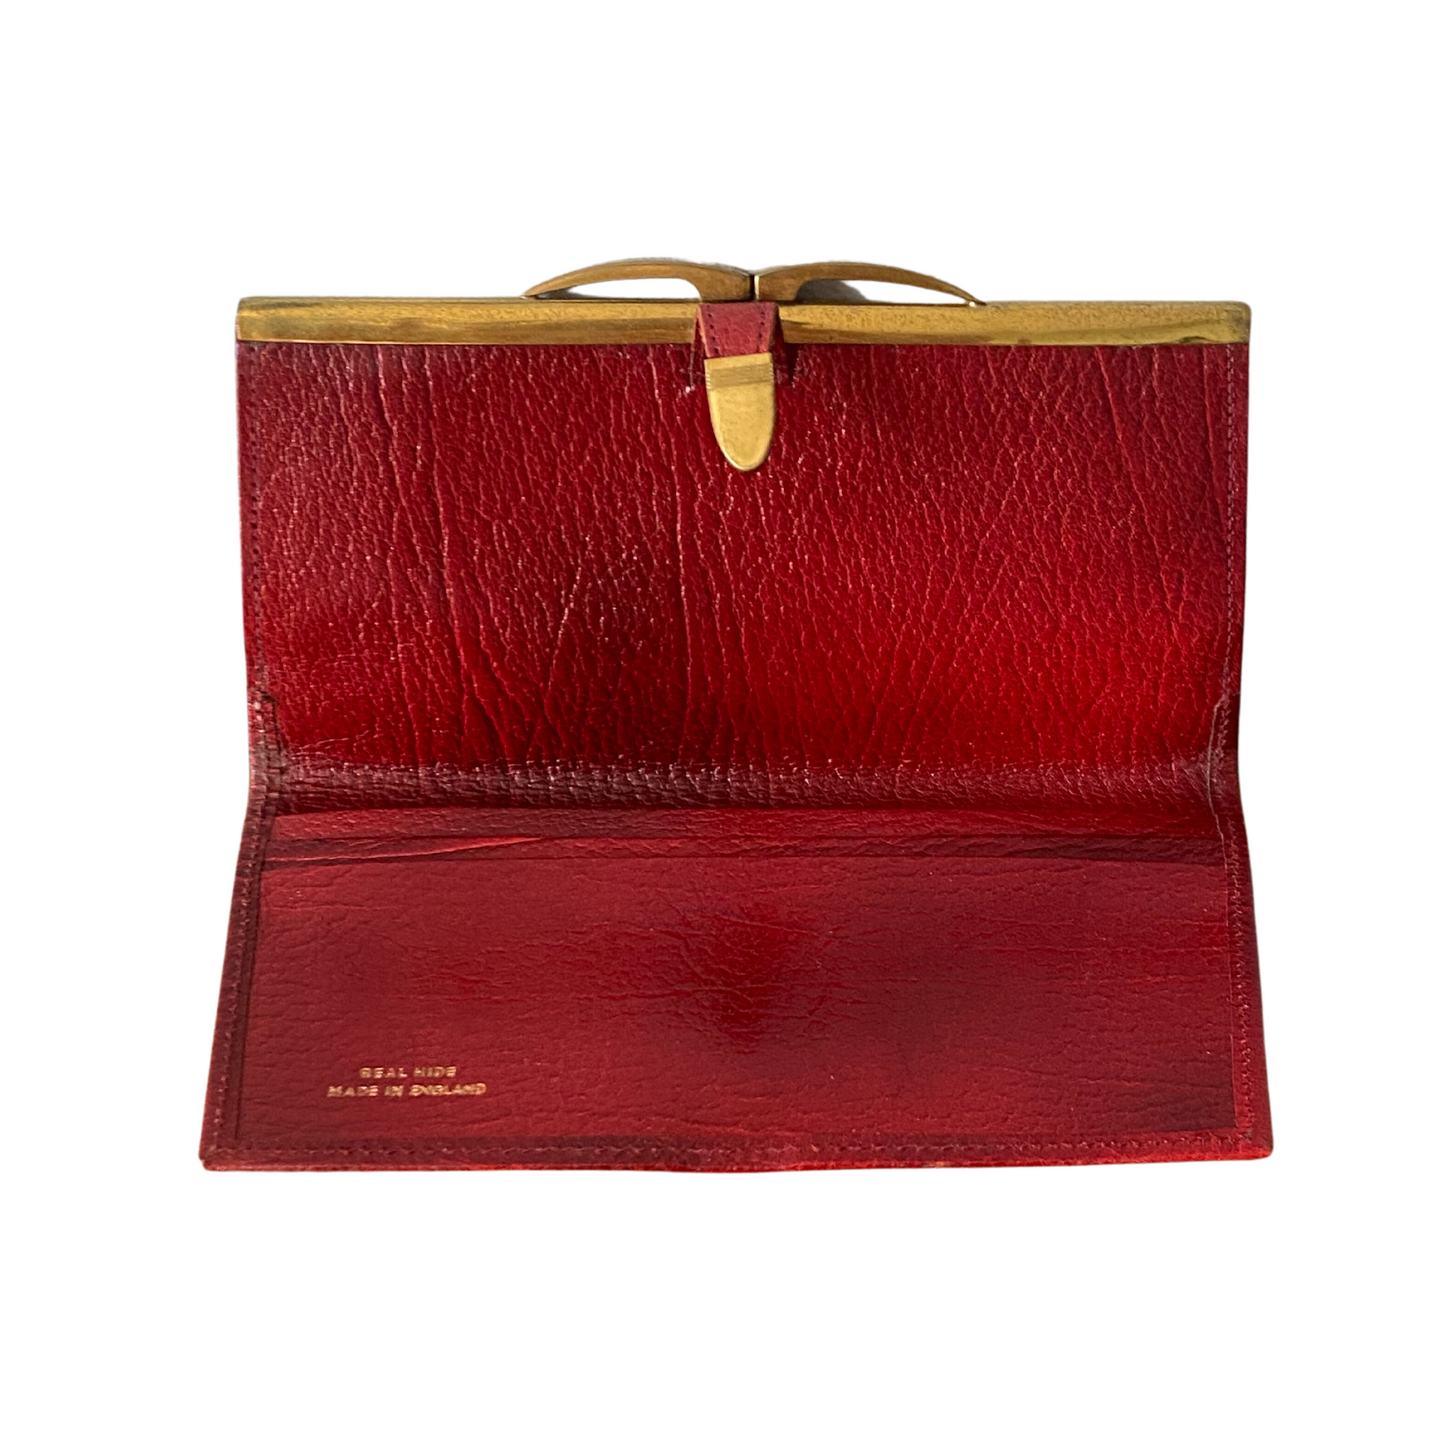 British-made red leather purse/wallet with ample space for essentials